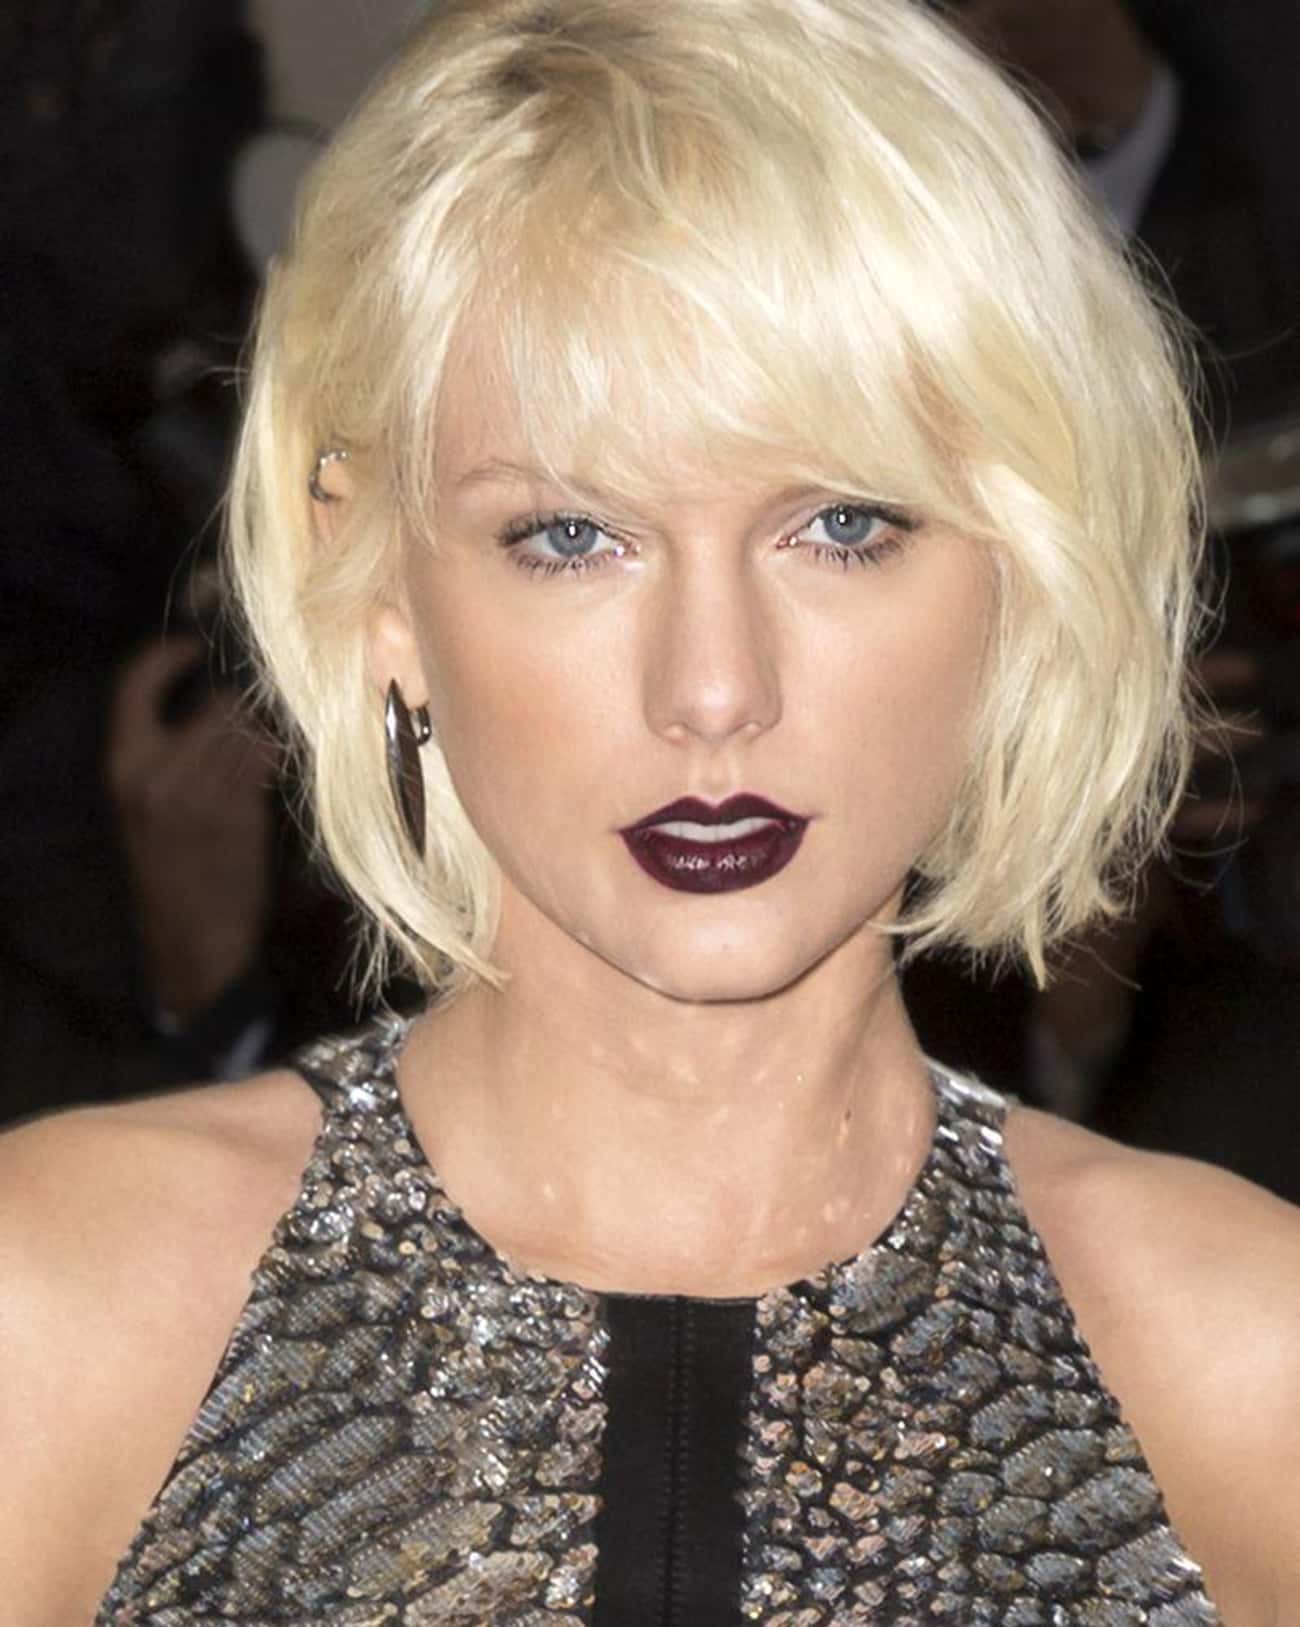 Taylor Swift Hairstyles, Ranked Best to Worst by Swifties